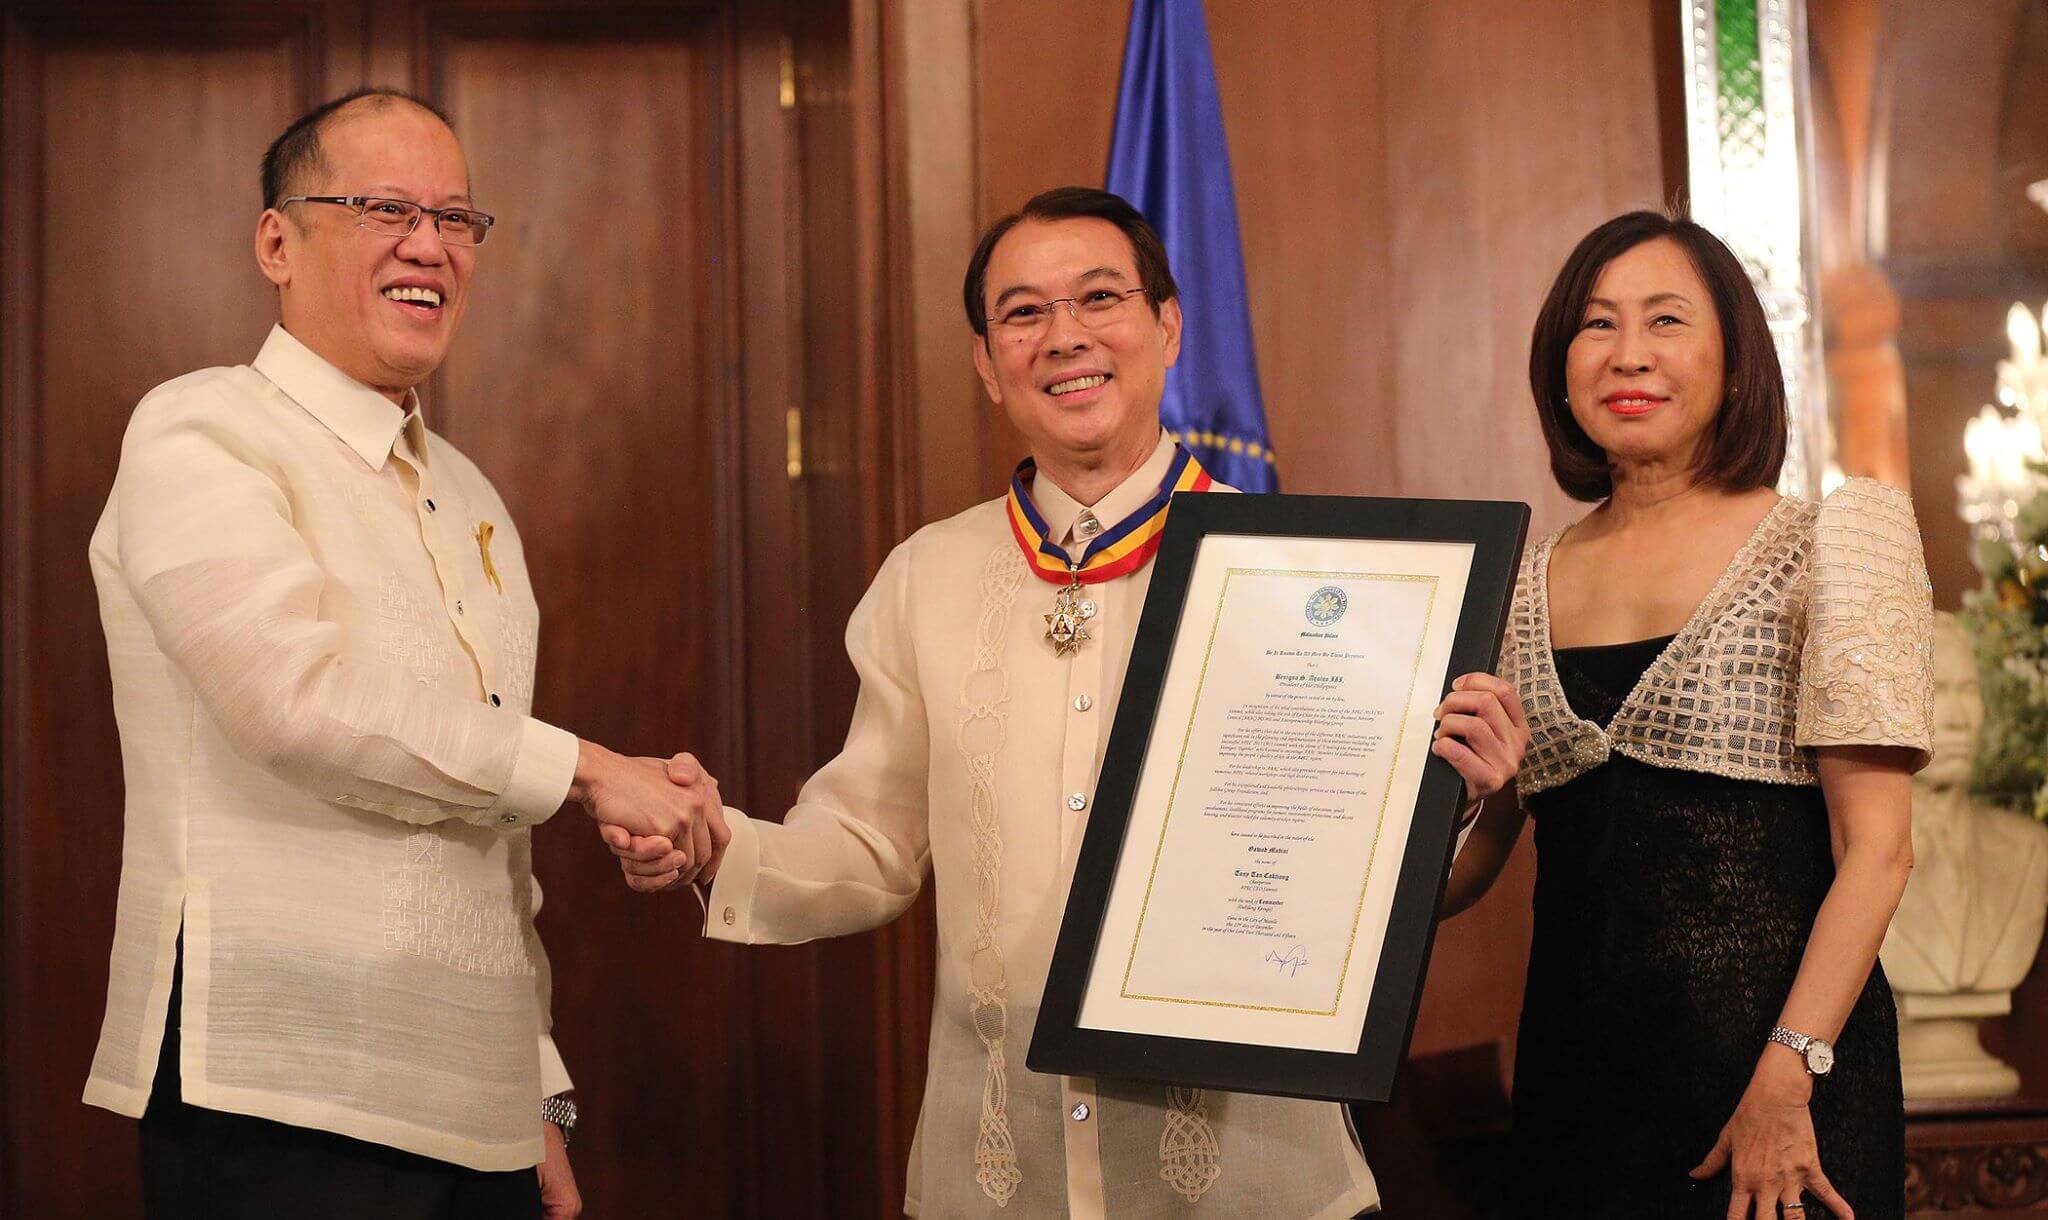 Jollibee Chairman and Founder, Mr. Tony Tan Caktiong, received the Gawad Mabini from the late former President Benigno Aquino III for successfully leading the APEC 2015 CEO Summit as Chairman. 